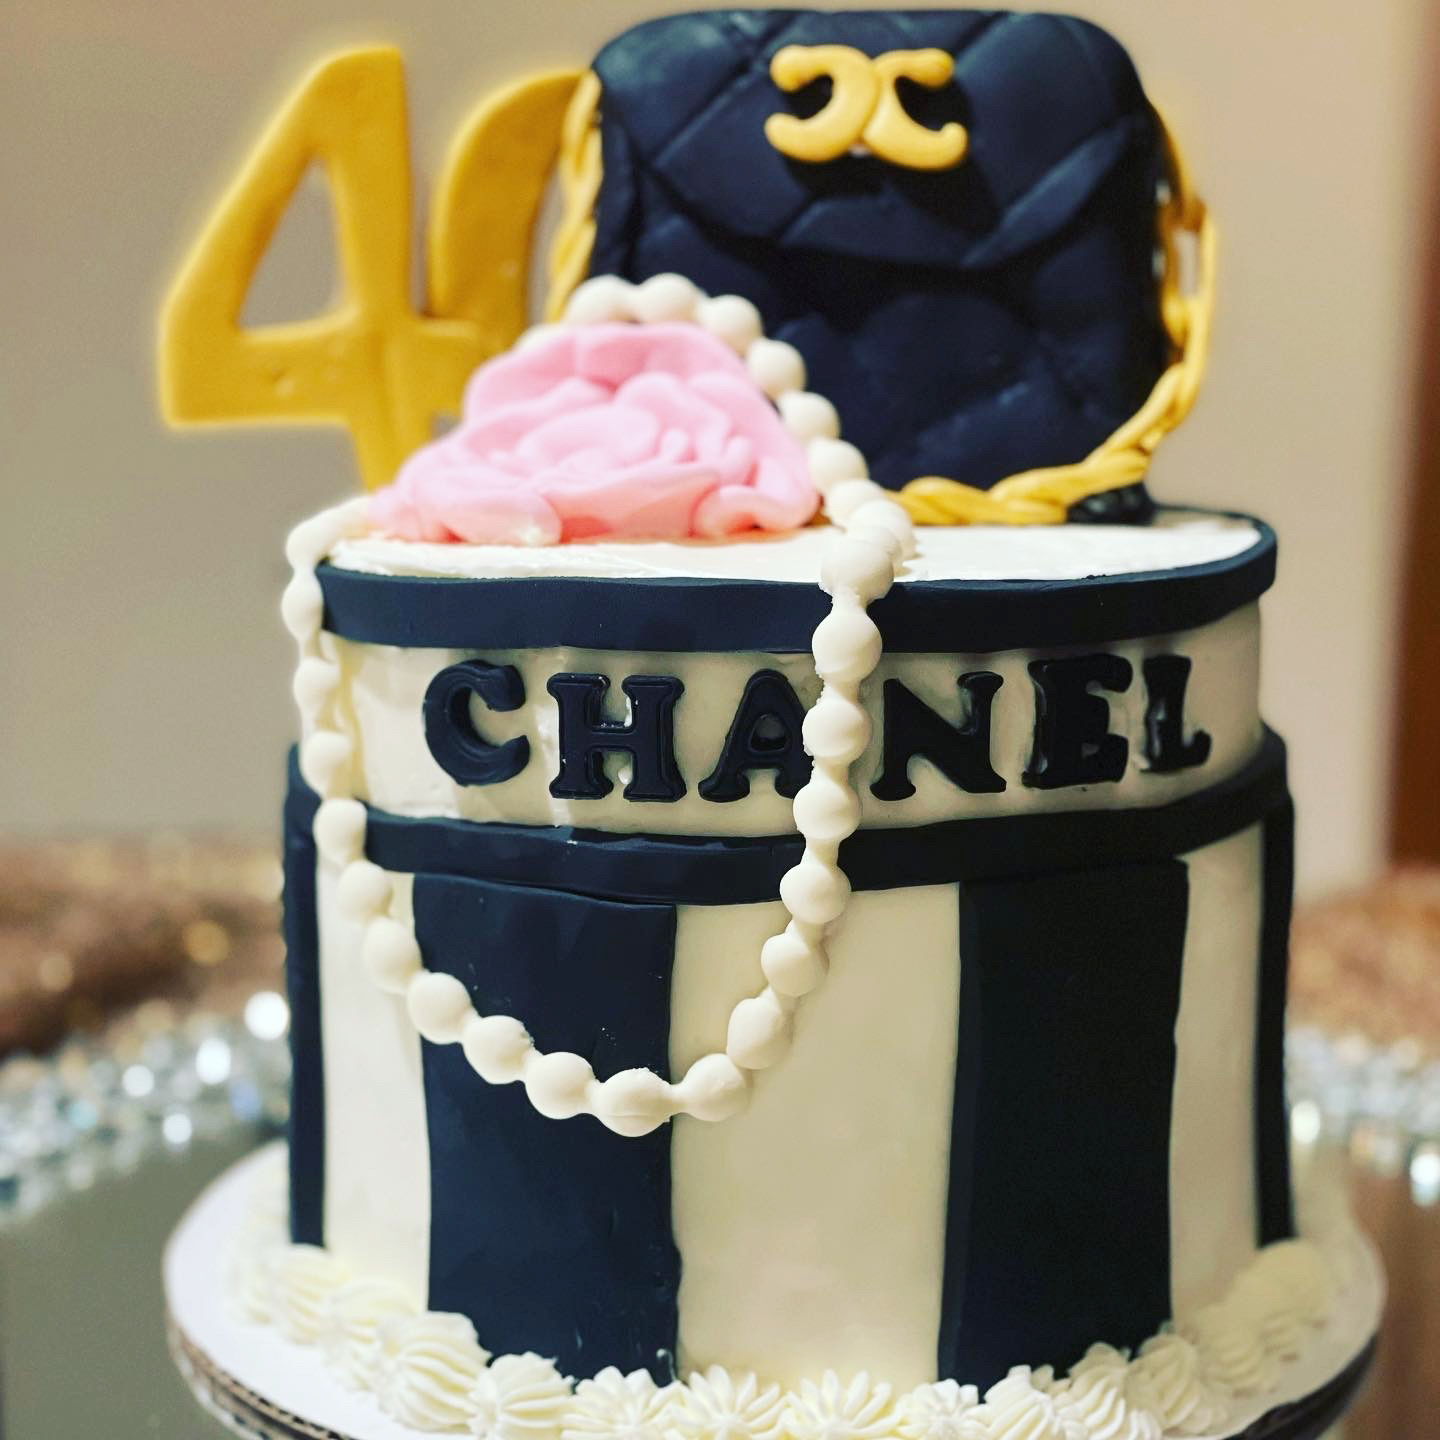 A Chanel purse cake made by Finley Sheers.